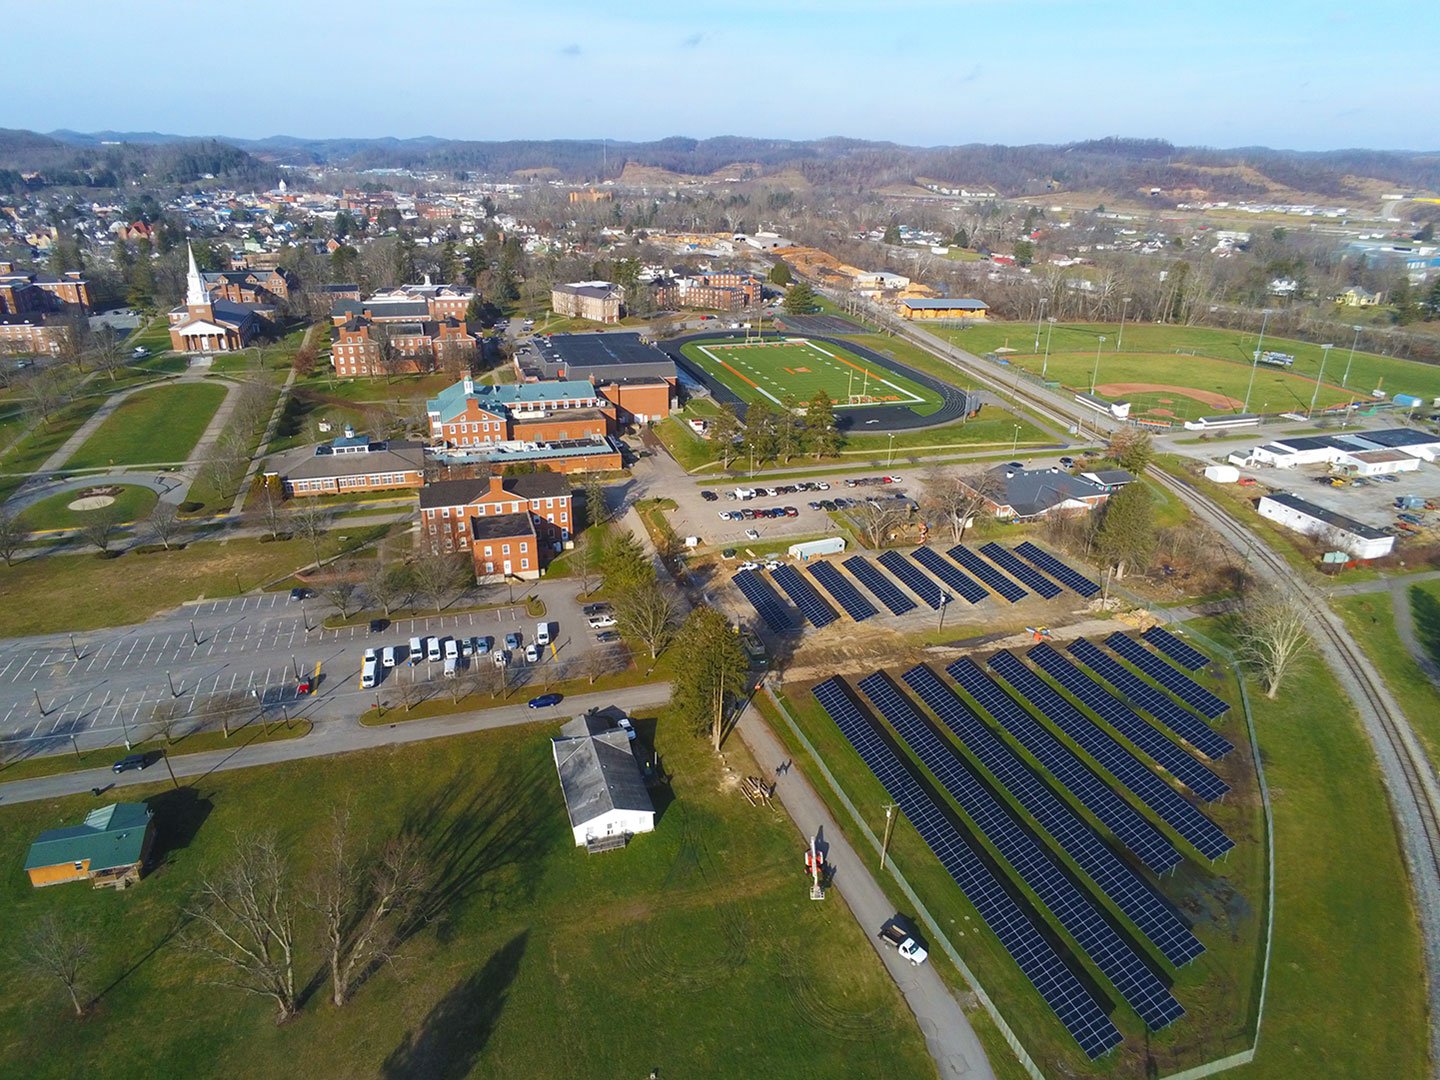 Ariel view of college with solar panels